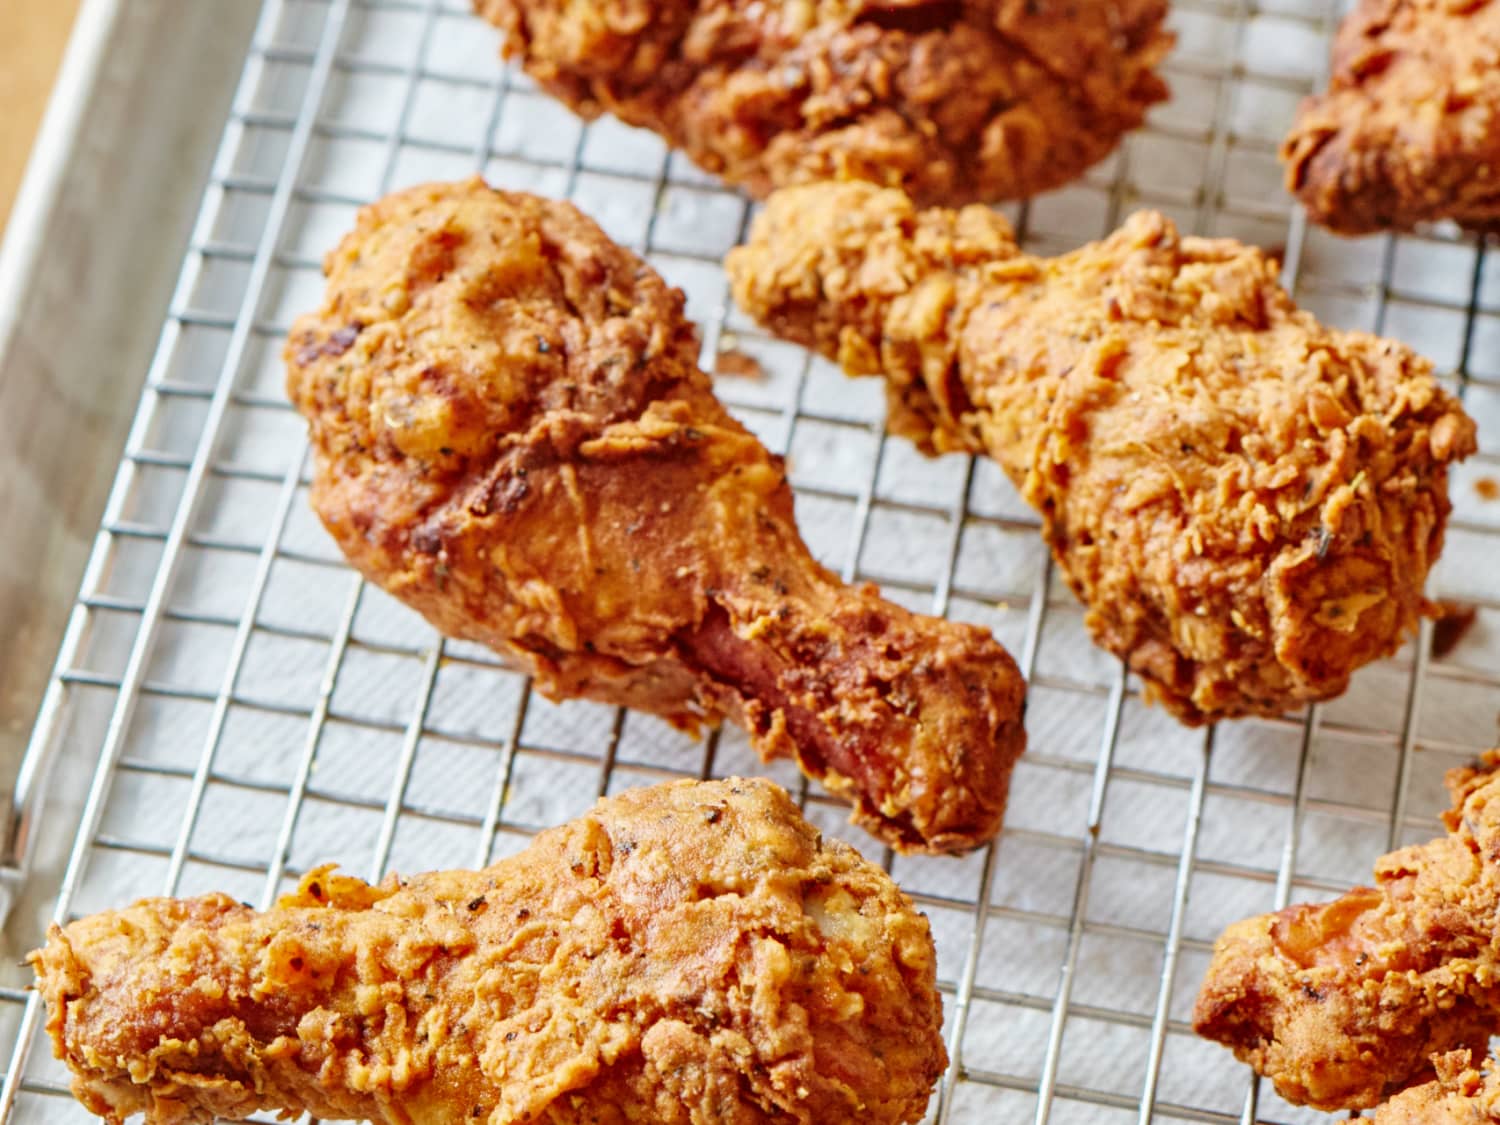 How To Make Crispy Juicy Fried Chicken That S Better Than Kfc Kitchn,Flies In House Plants